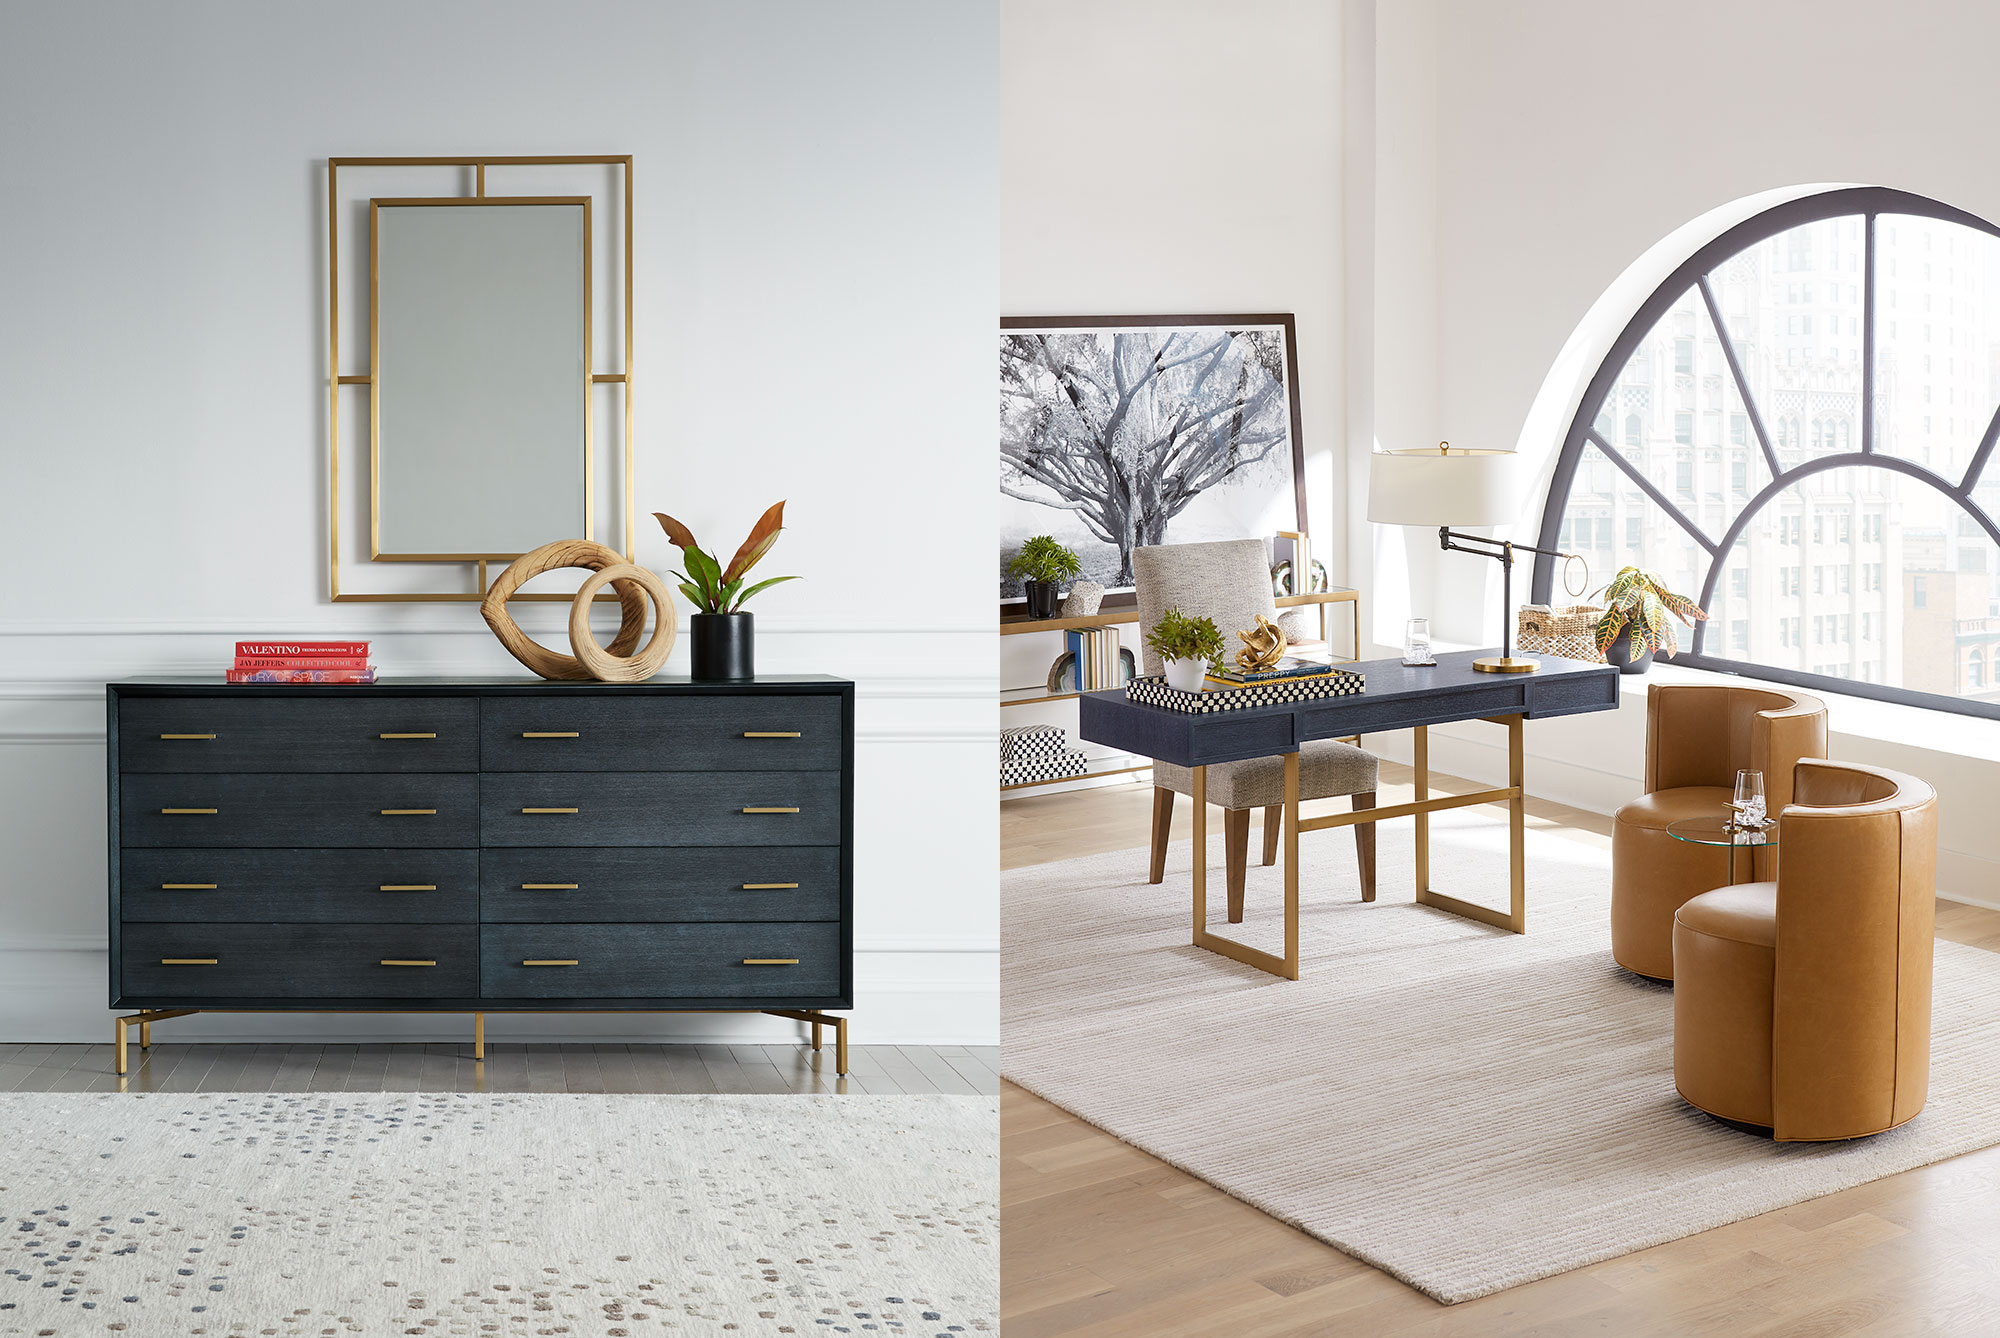 Mitchell Gold Bob Williams Fall Furnishings Are Both Timely And